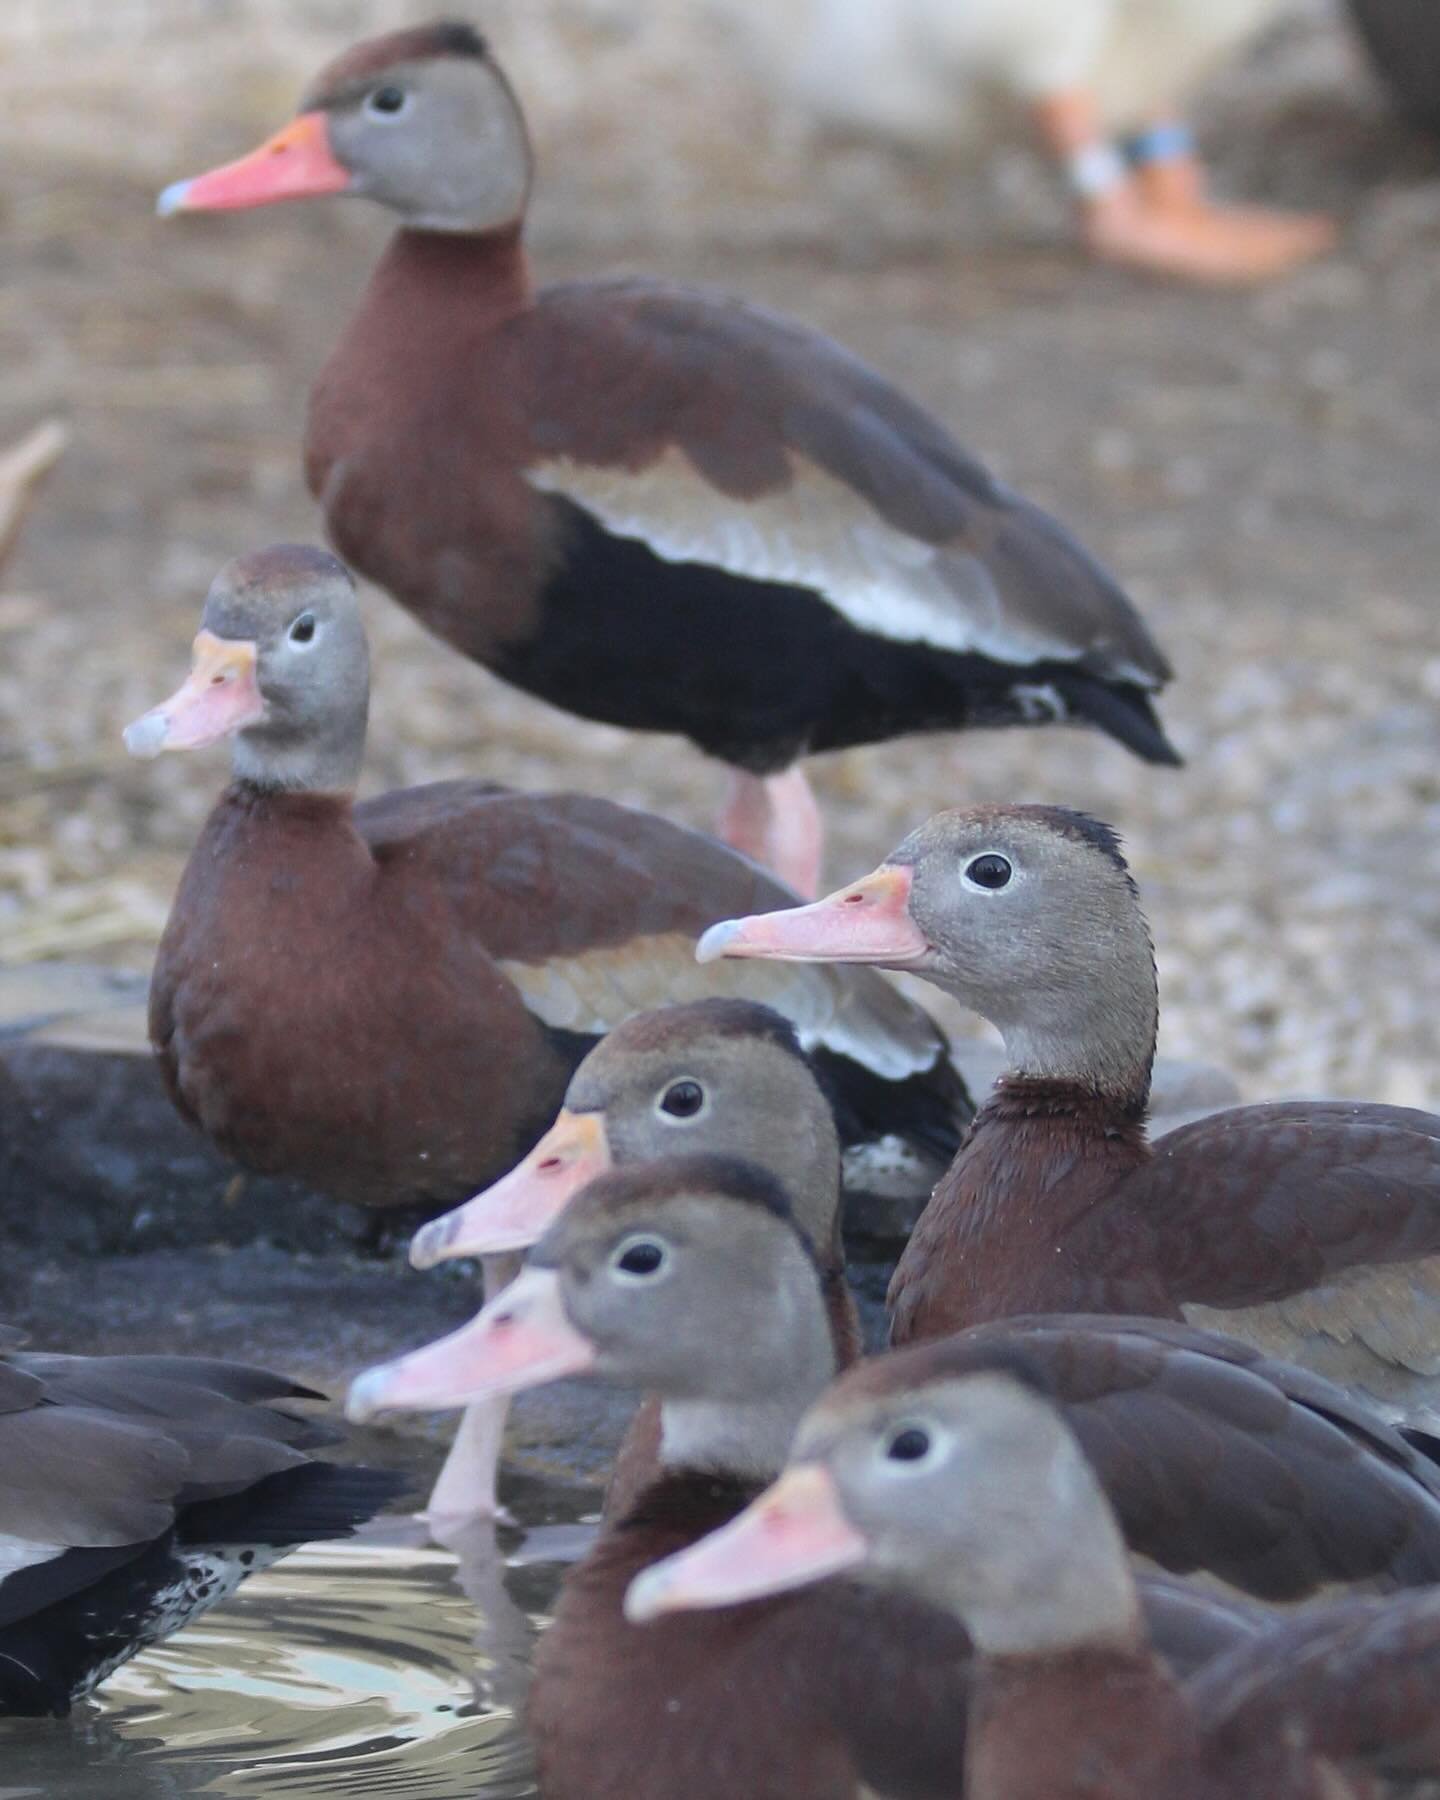 #HappyMothersDay 🌸! These black-bellied whistling ducks were transferred to us from another rescue after being orphaned. They were in need of a mother figure&hellip;

As luck would have it, there is an adult black-bellied whistling duck who is a fre